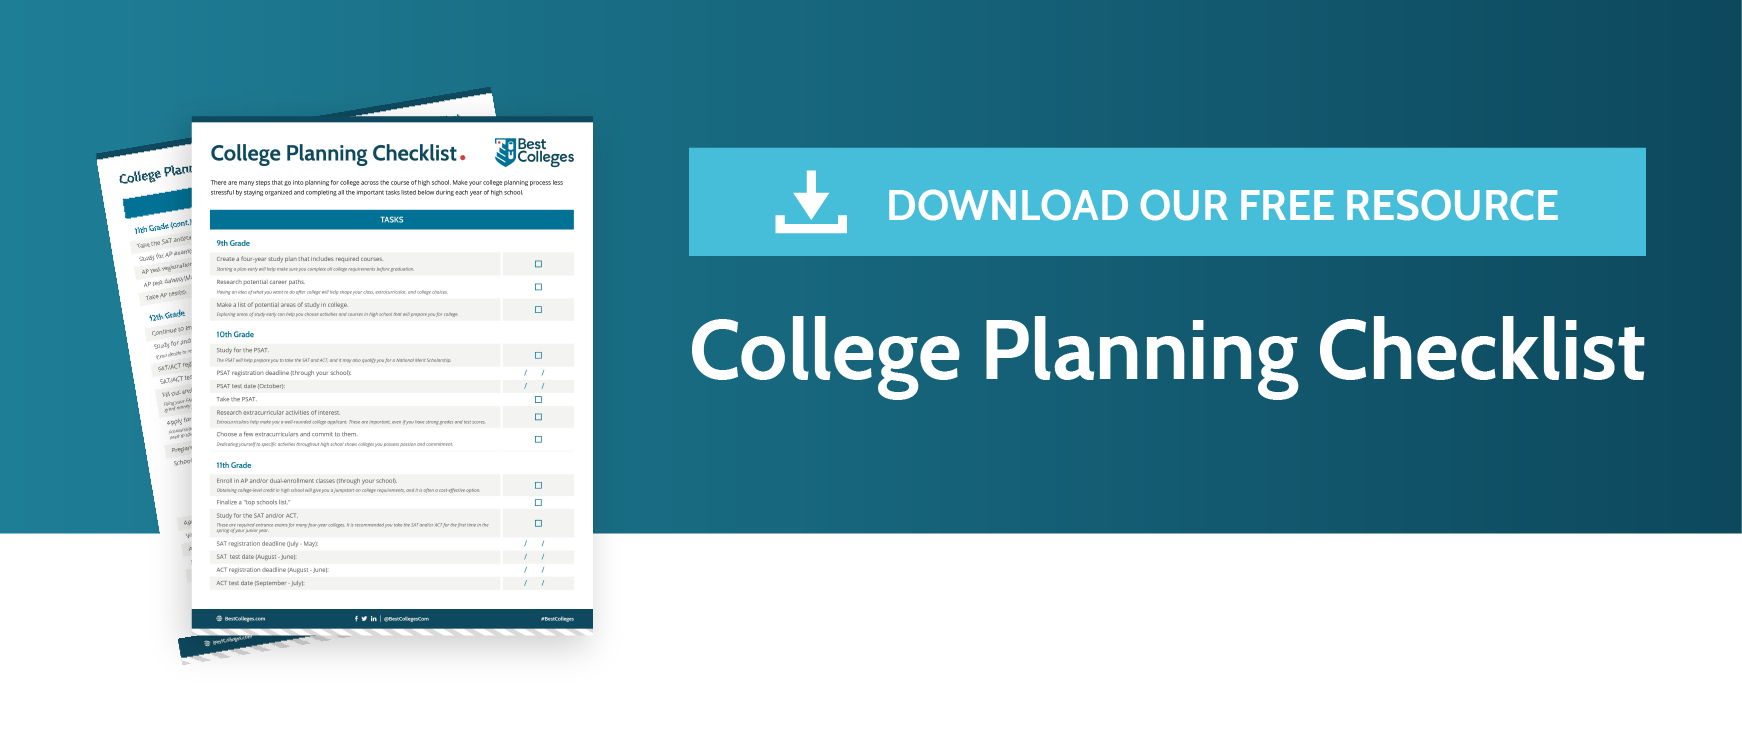 Download our free resource, the College Planning Checklist